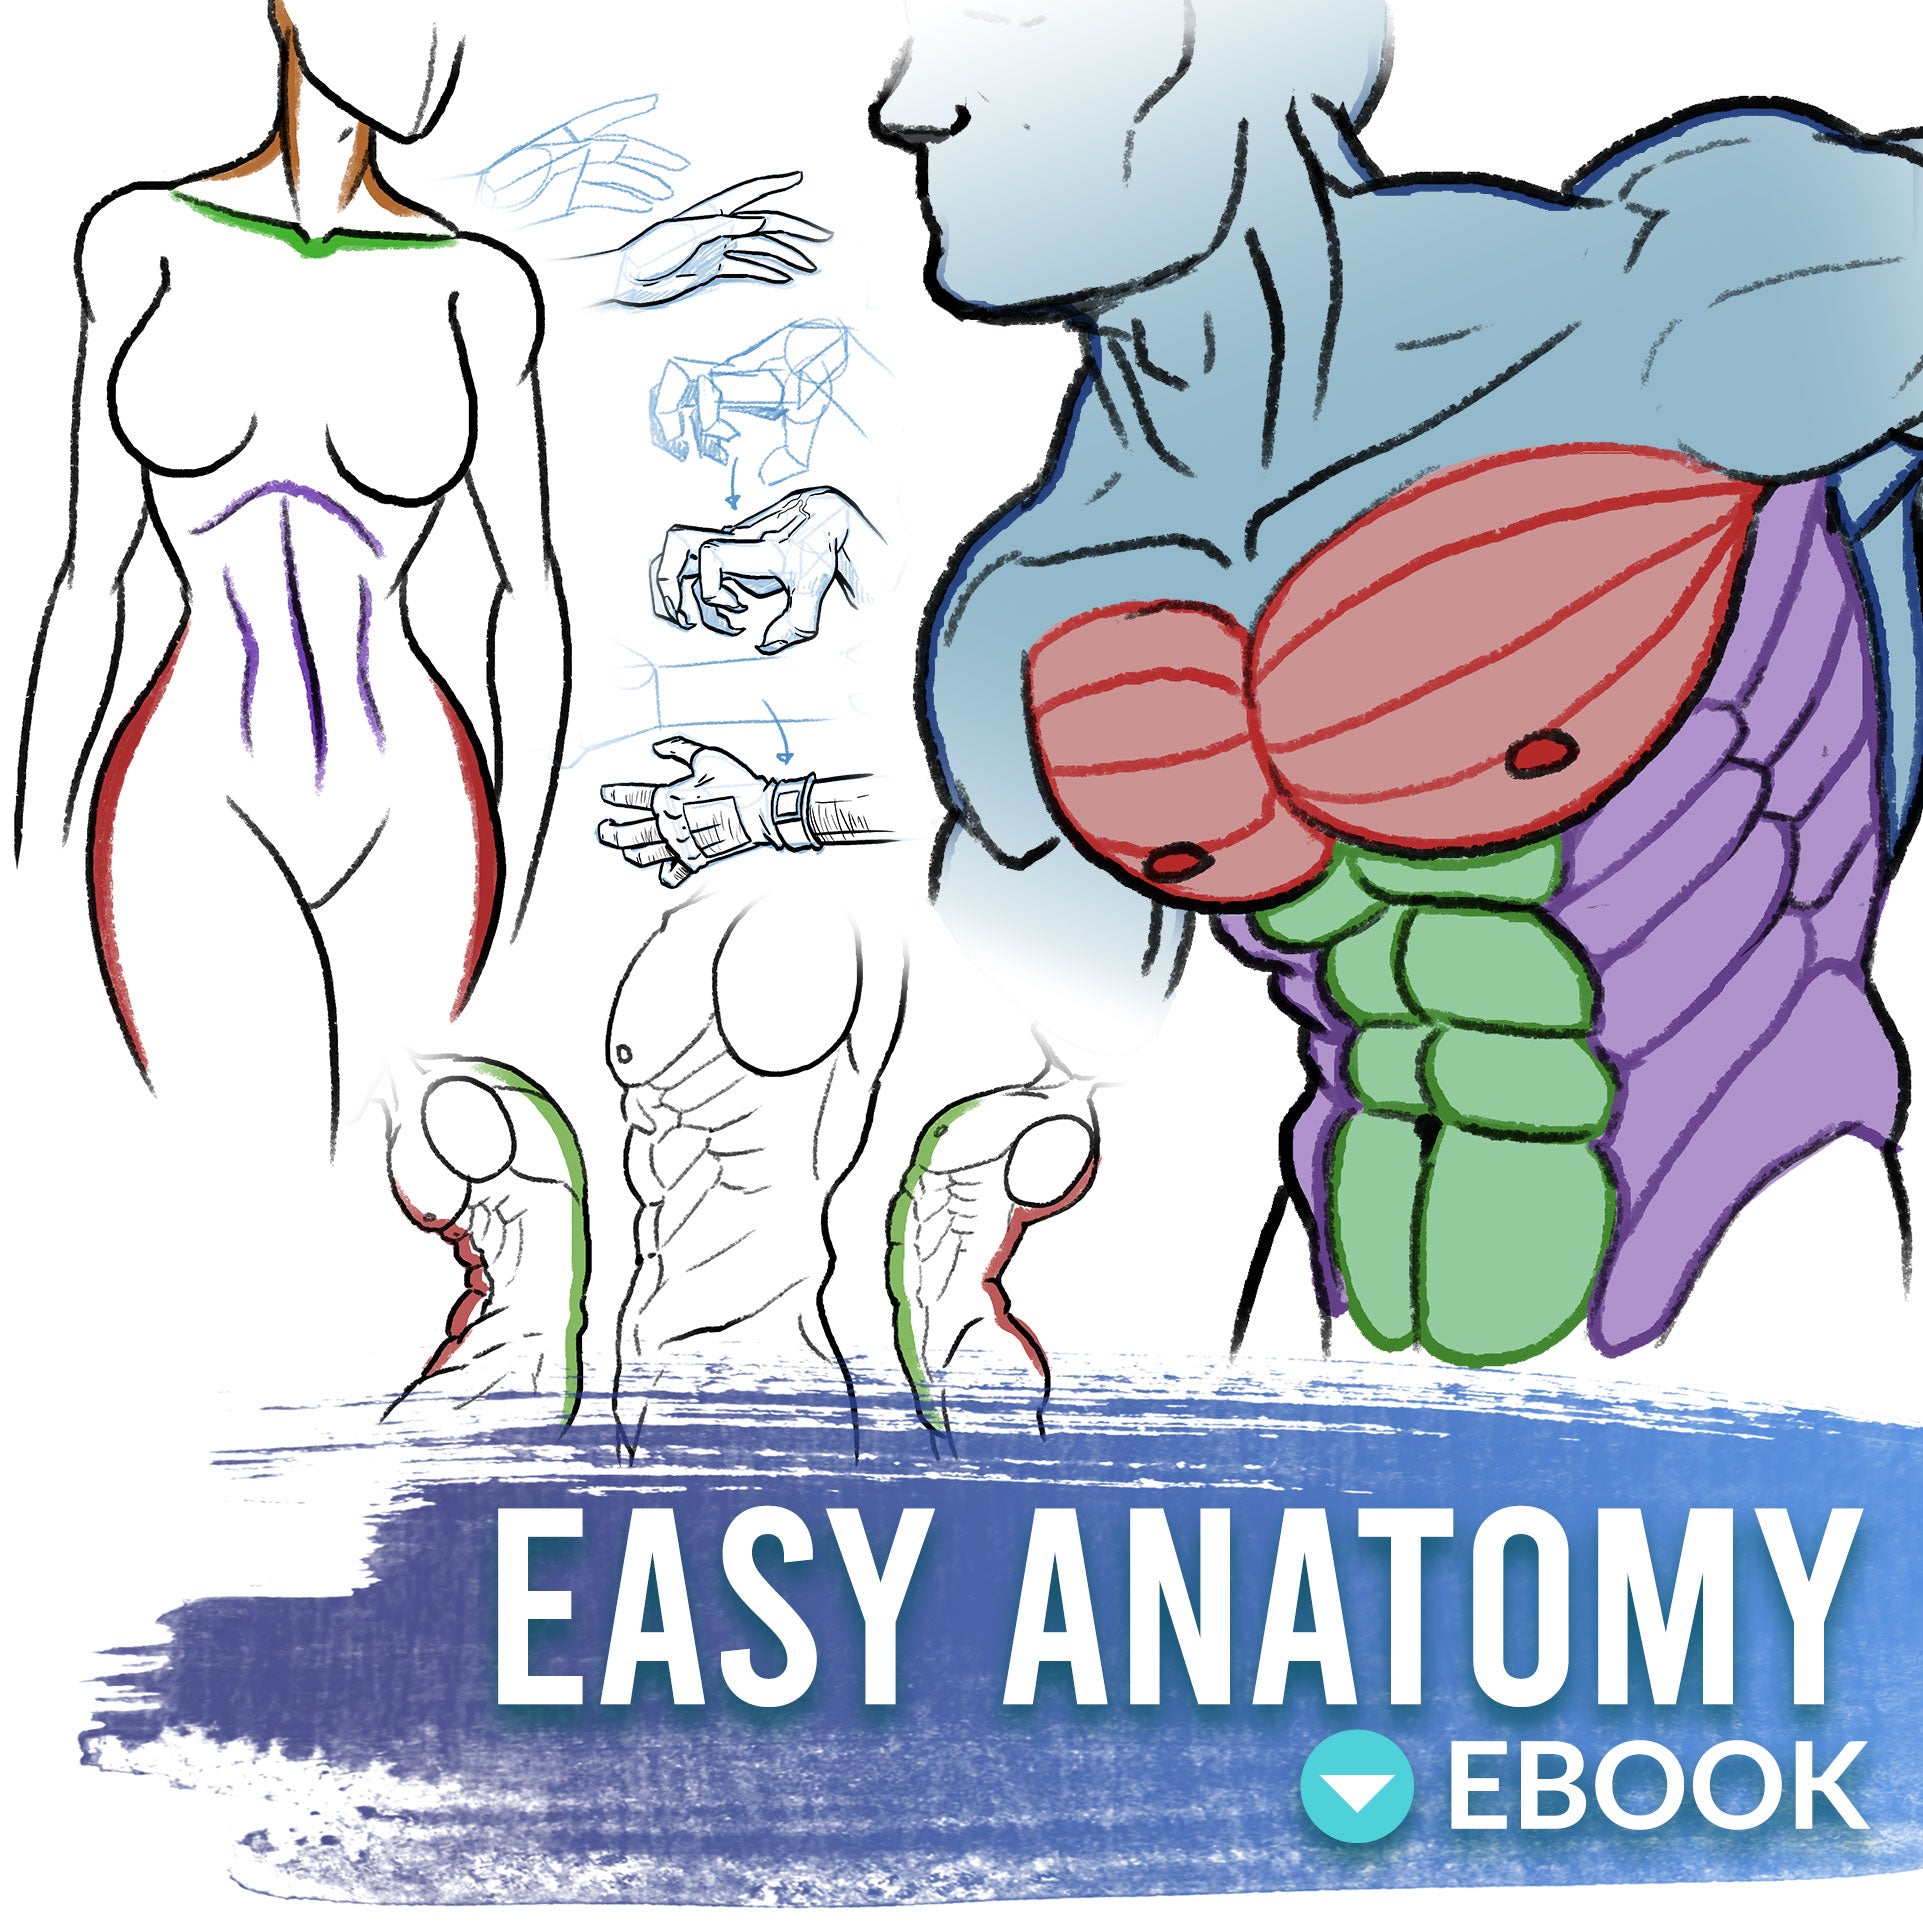 9 Best Anatomy Reference Books For Artists! - Don Corgi